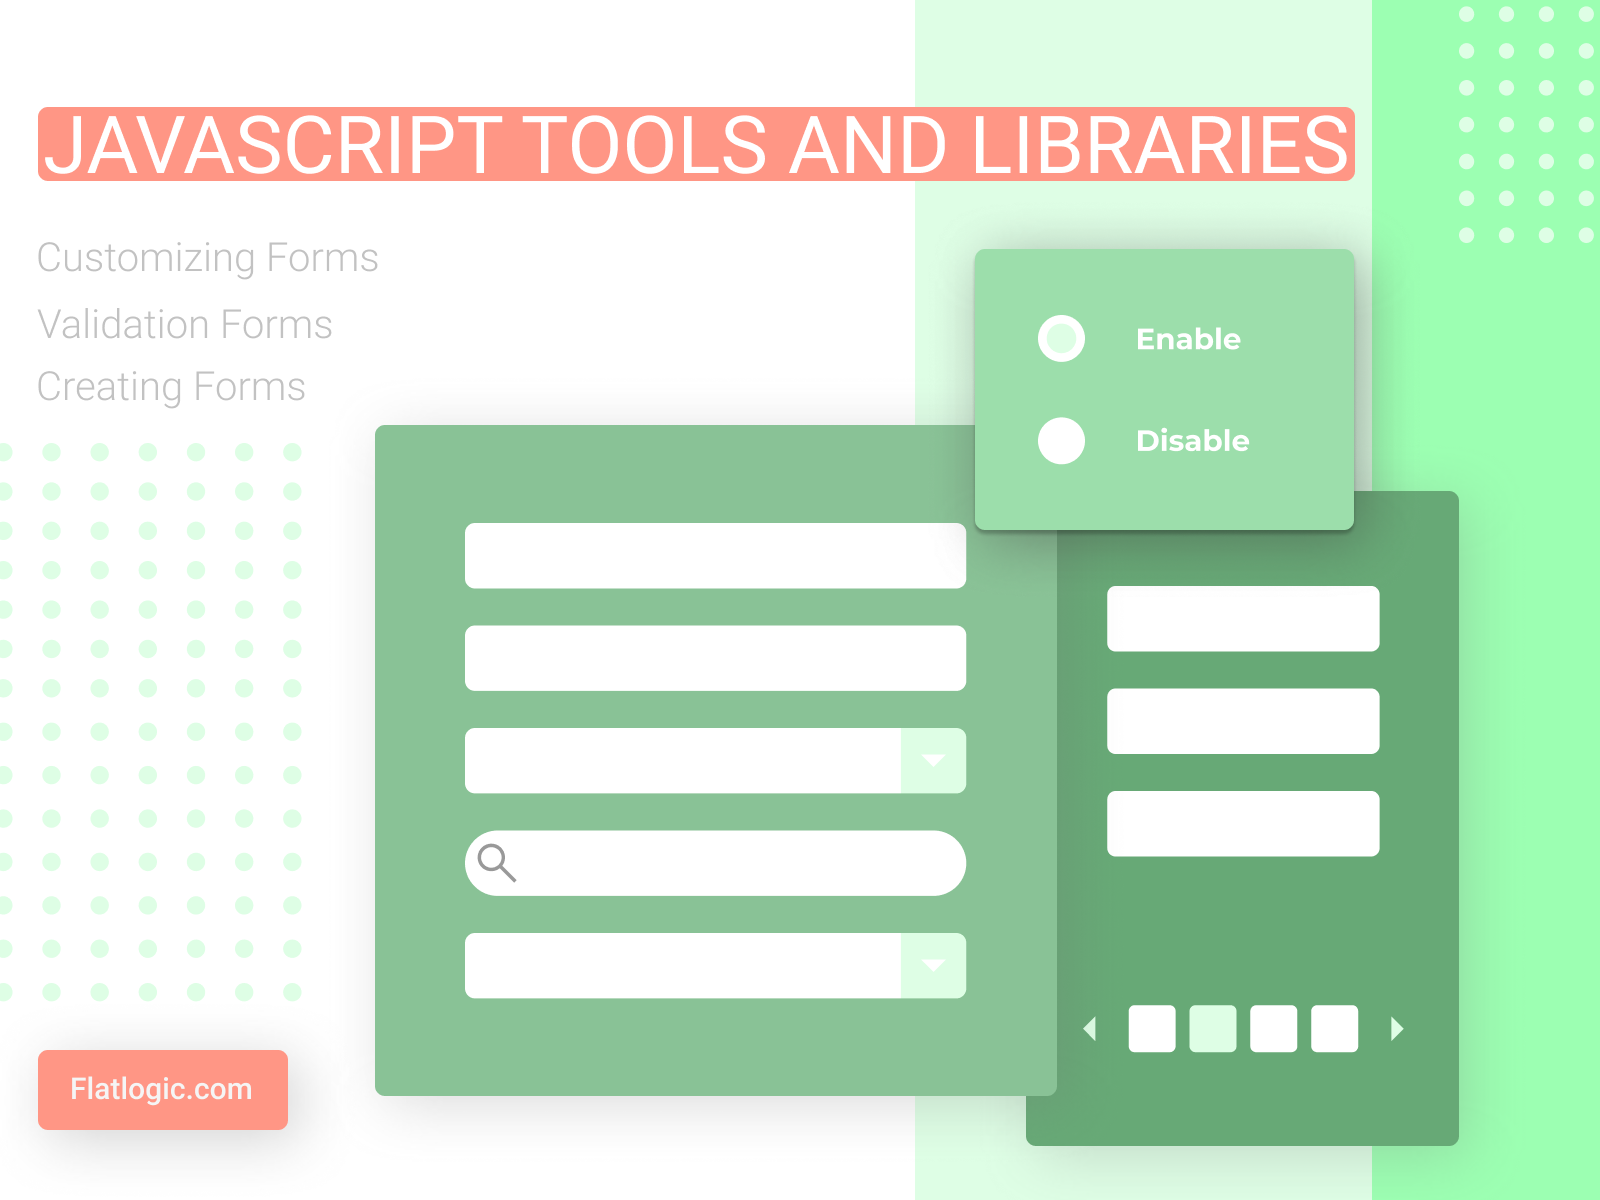 Javascript Tools and Libraries for Creating, Customizing and Validation Forms 